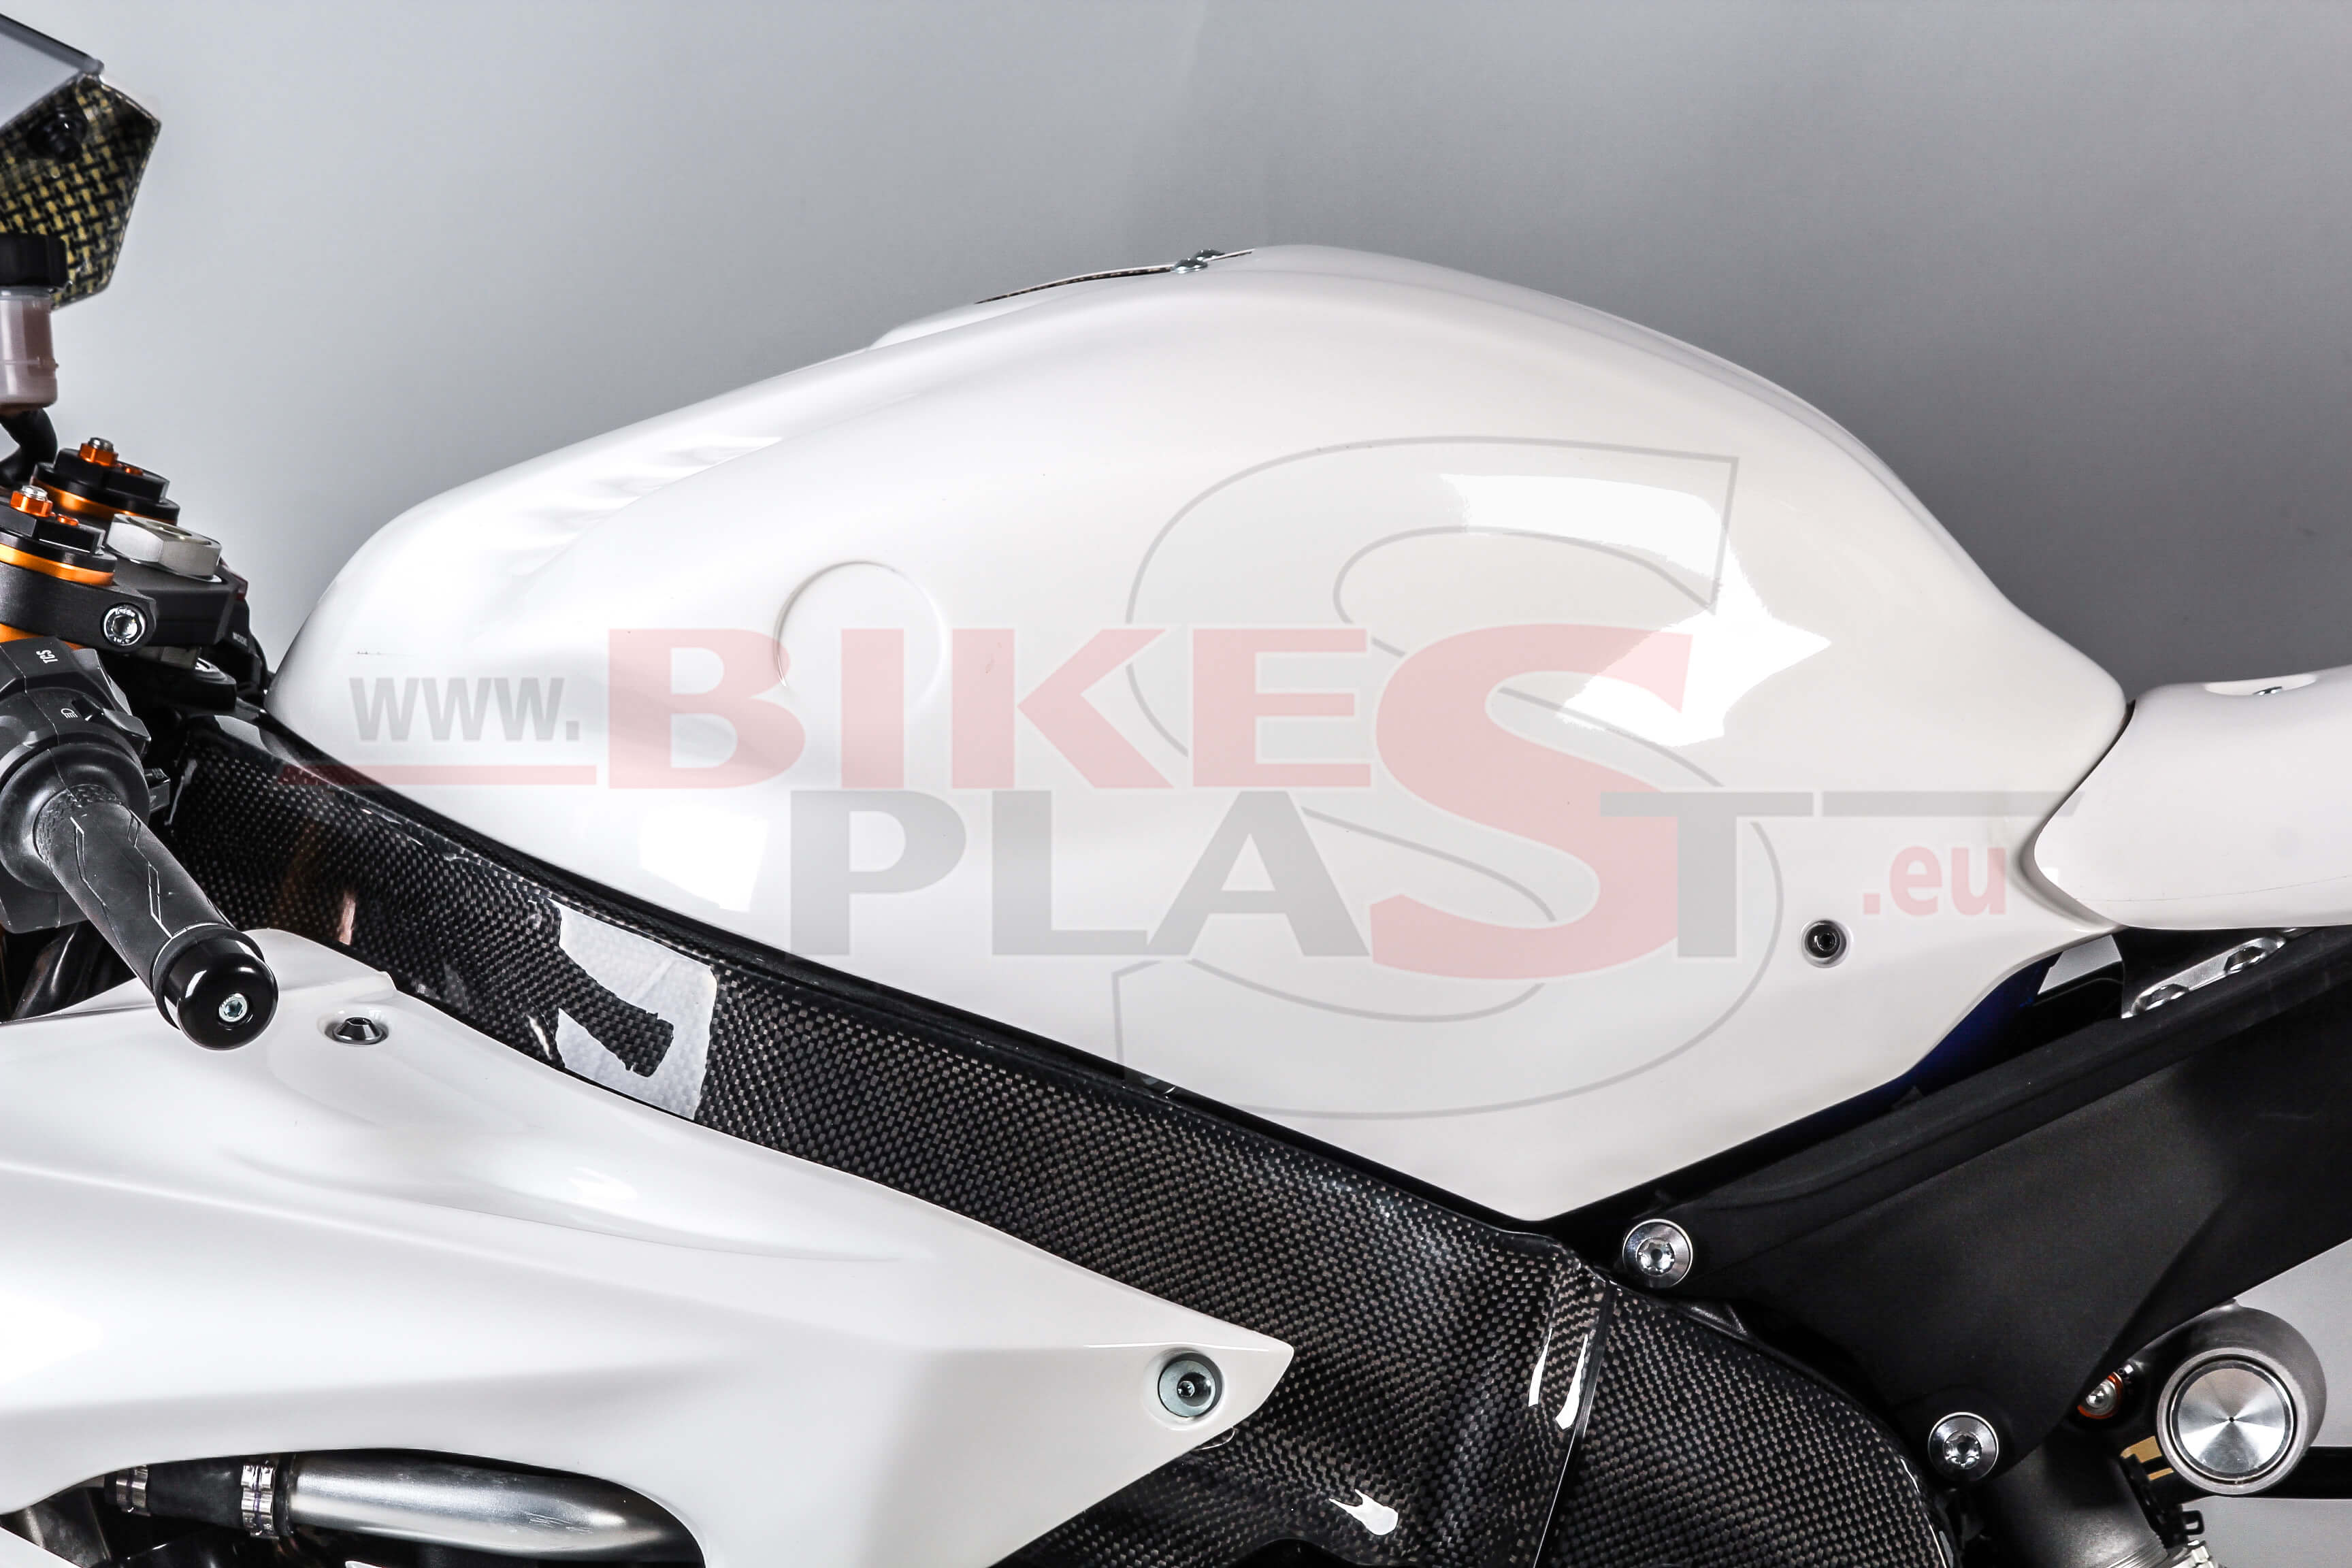 Fuel Tank Cover